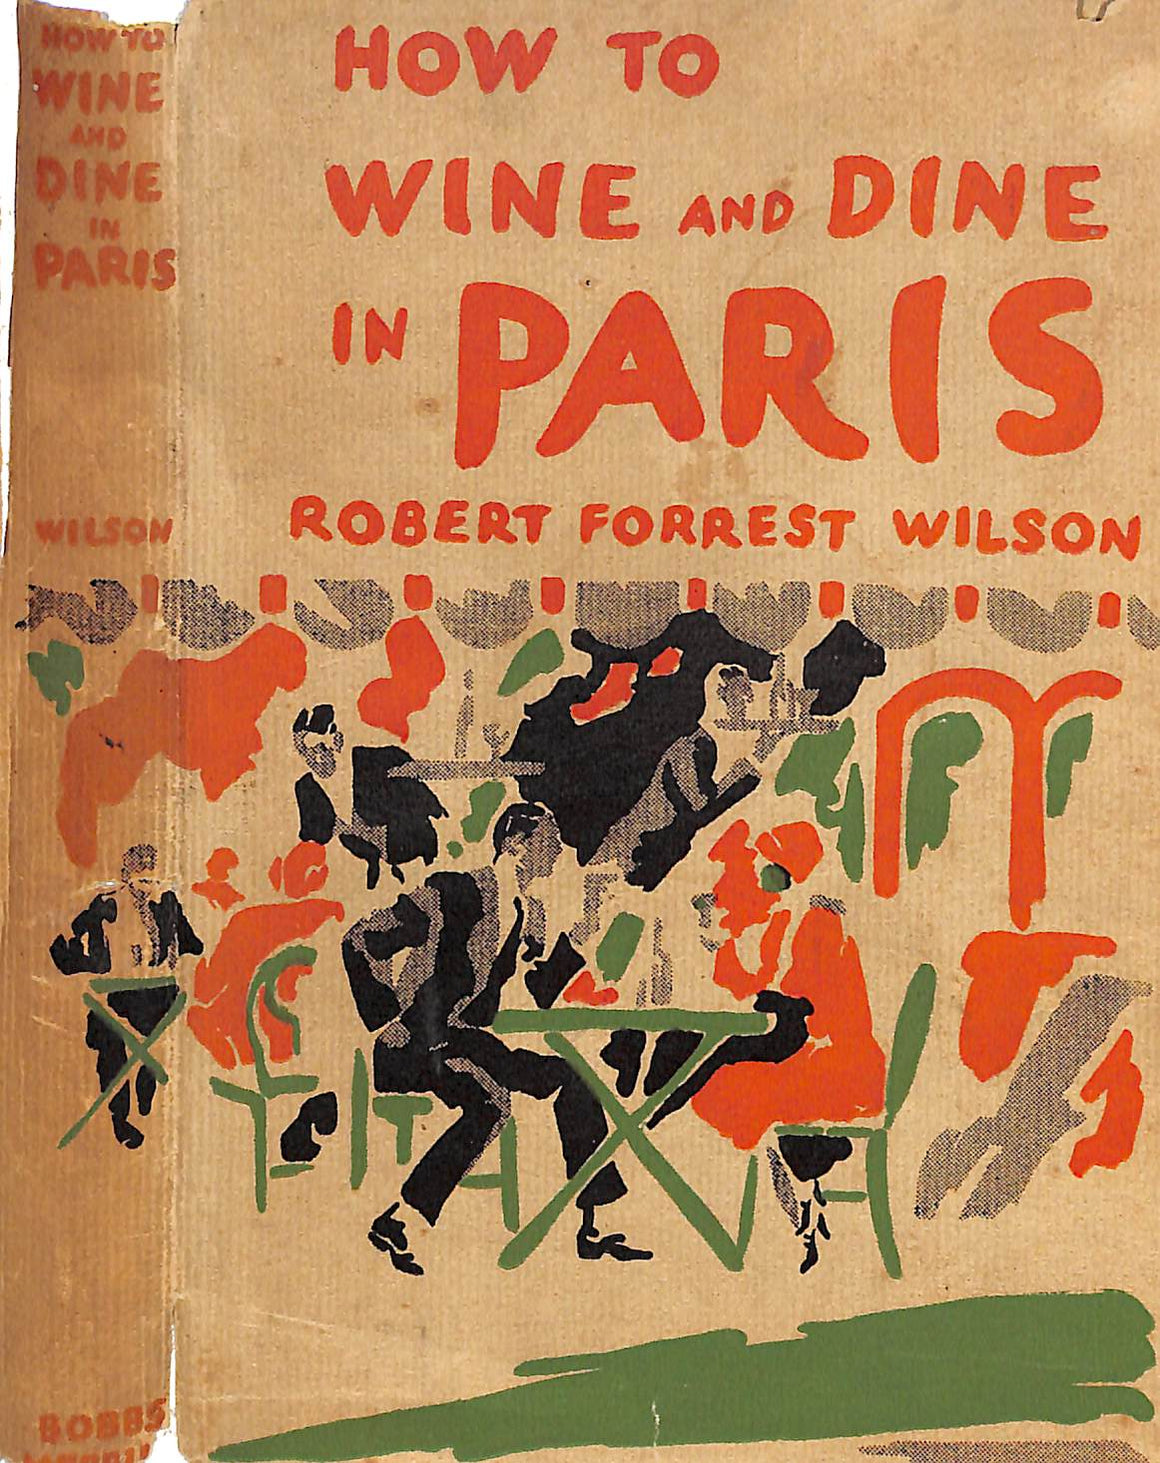 "How To Wine And Dine In Paris" 1930 WILSON, Robert Forrest (SOLD)